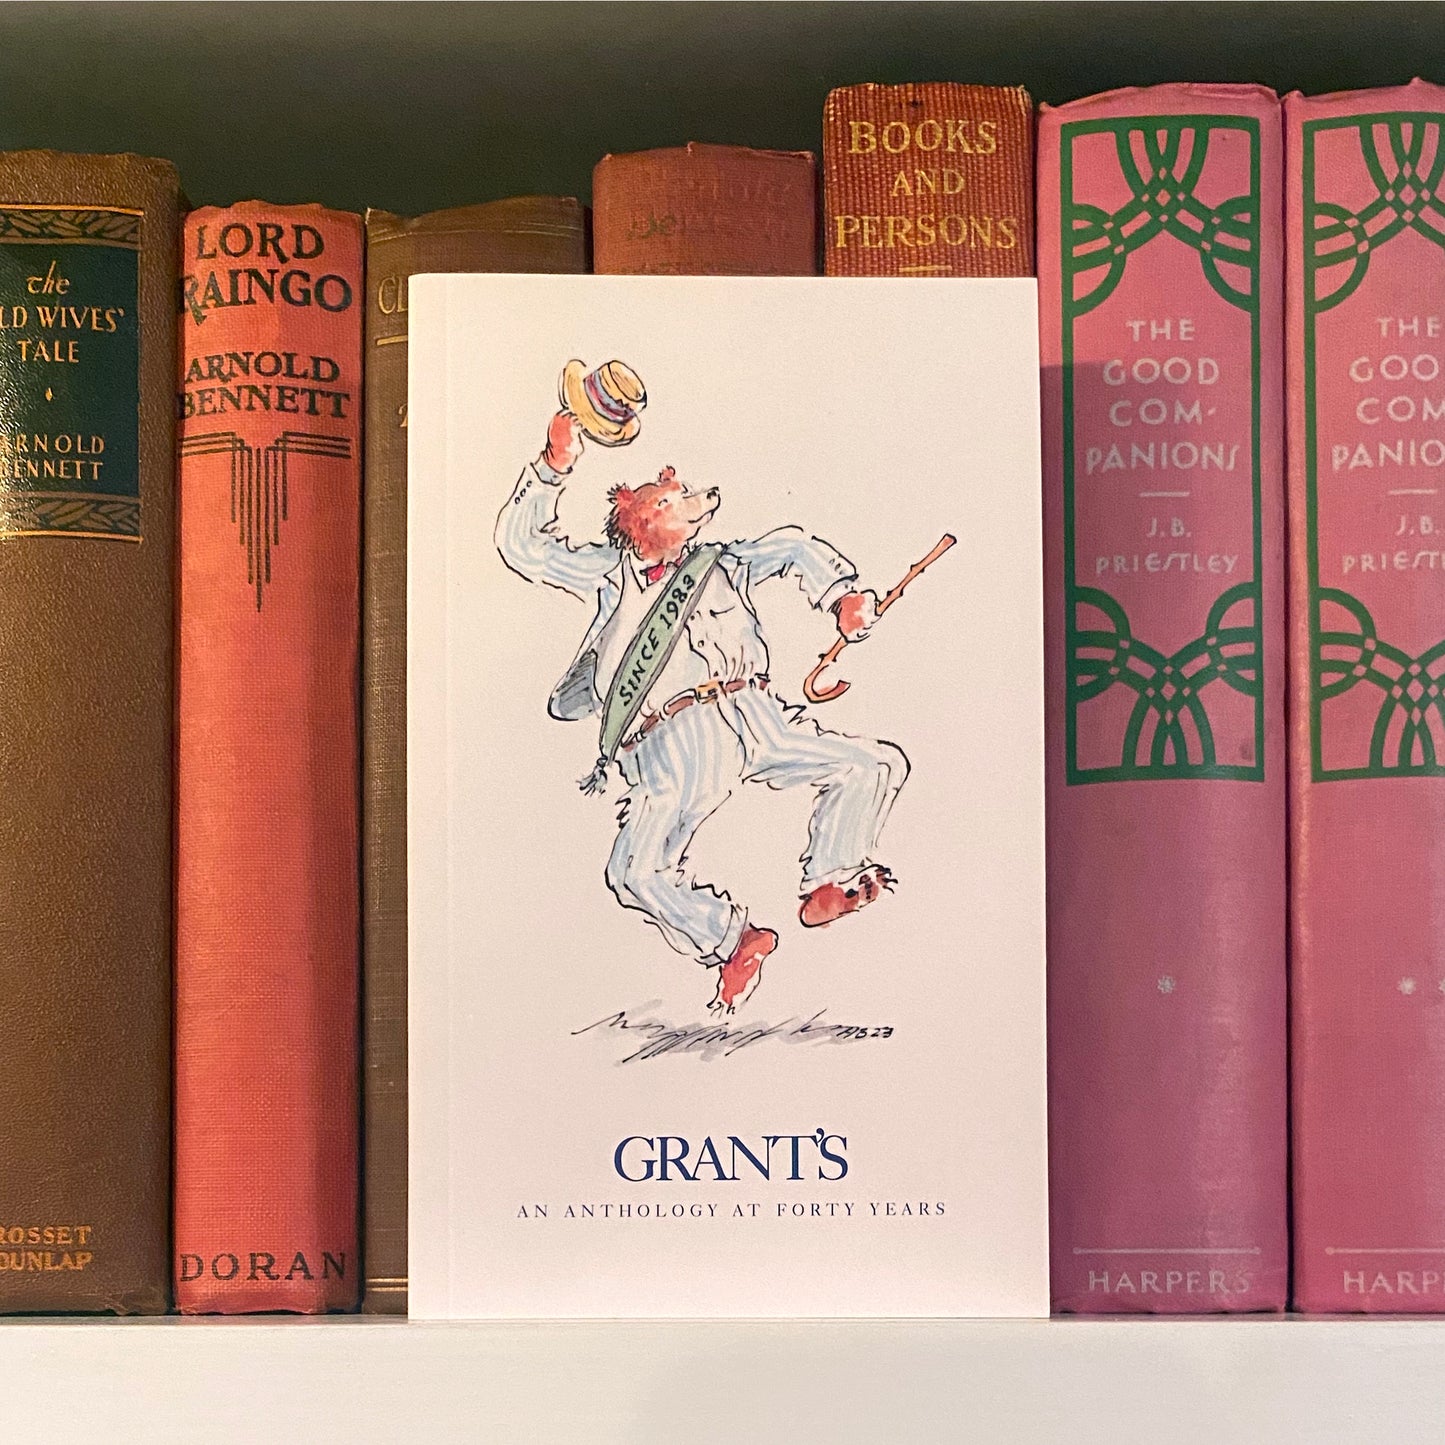 'Grant's: An Anthology at Forty Years'